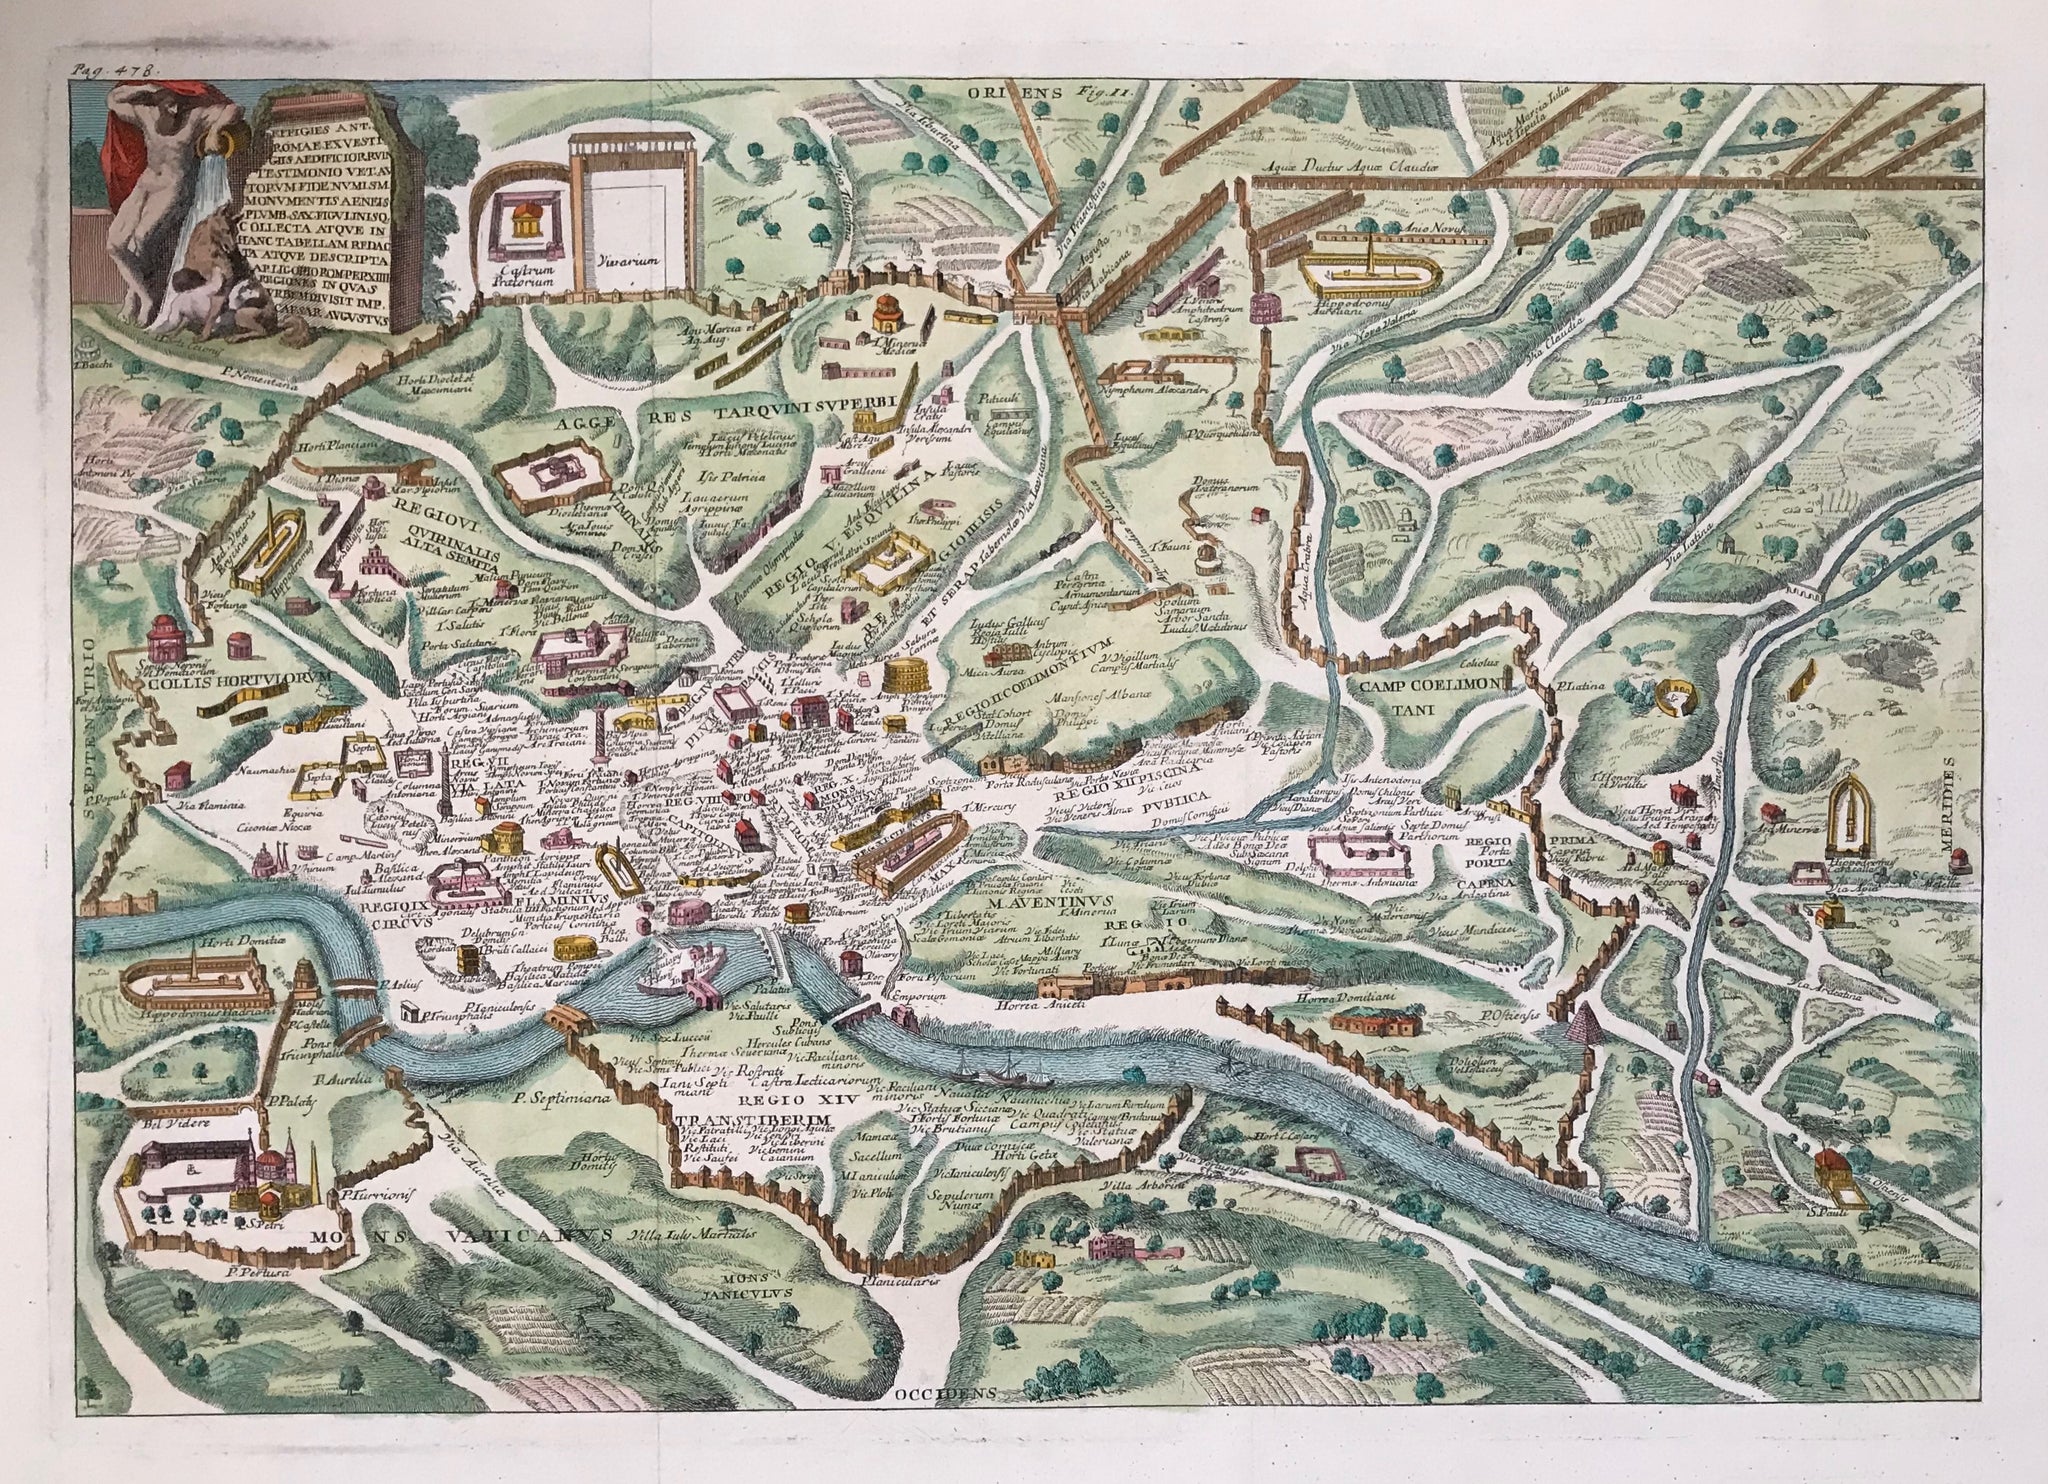 This absolutely rare and very attractive bird's eye view of Rome shows the location of the reconstructed antique buildings, sites etc of antique Rome within and beyond the walls. But it includes for example St. Peter on Mons Vaticanus. This is the first state of this map. Christoph Weigel used it as model for his similar map, which he published in his Atlas Scholasticus in Nuremberg, 1720